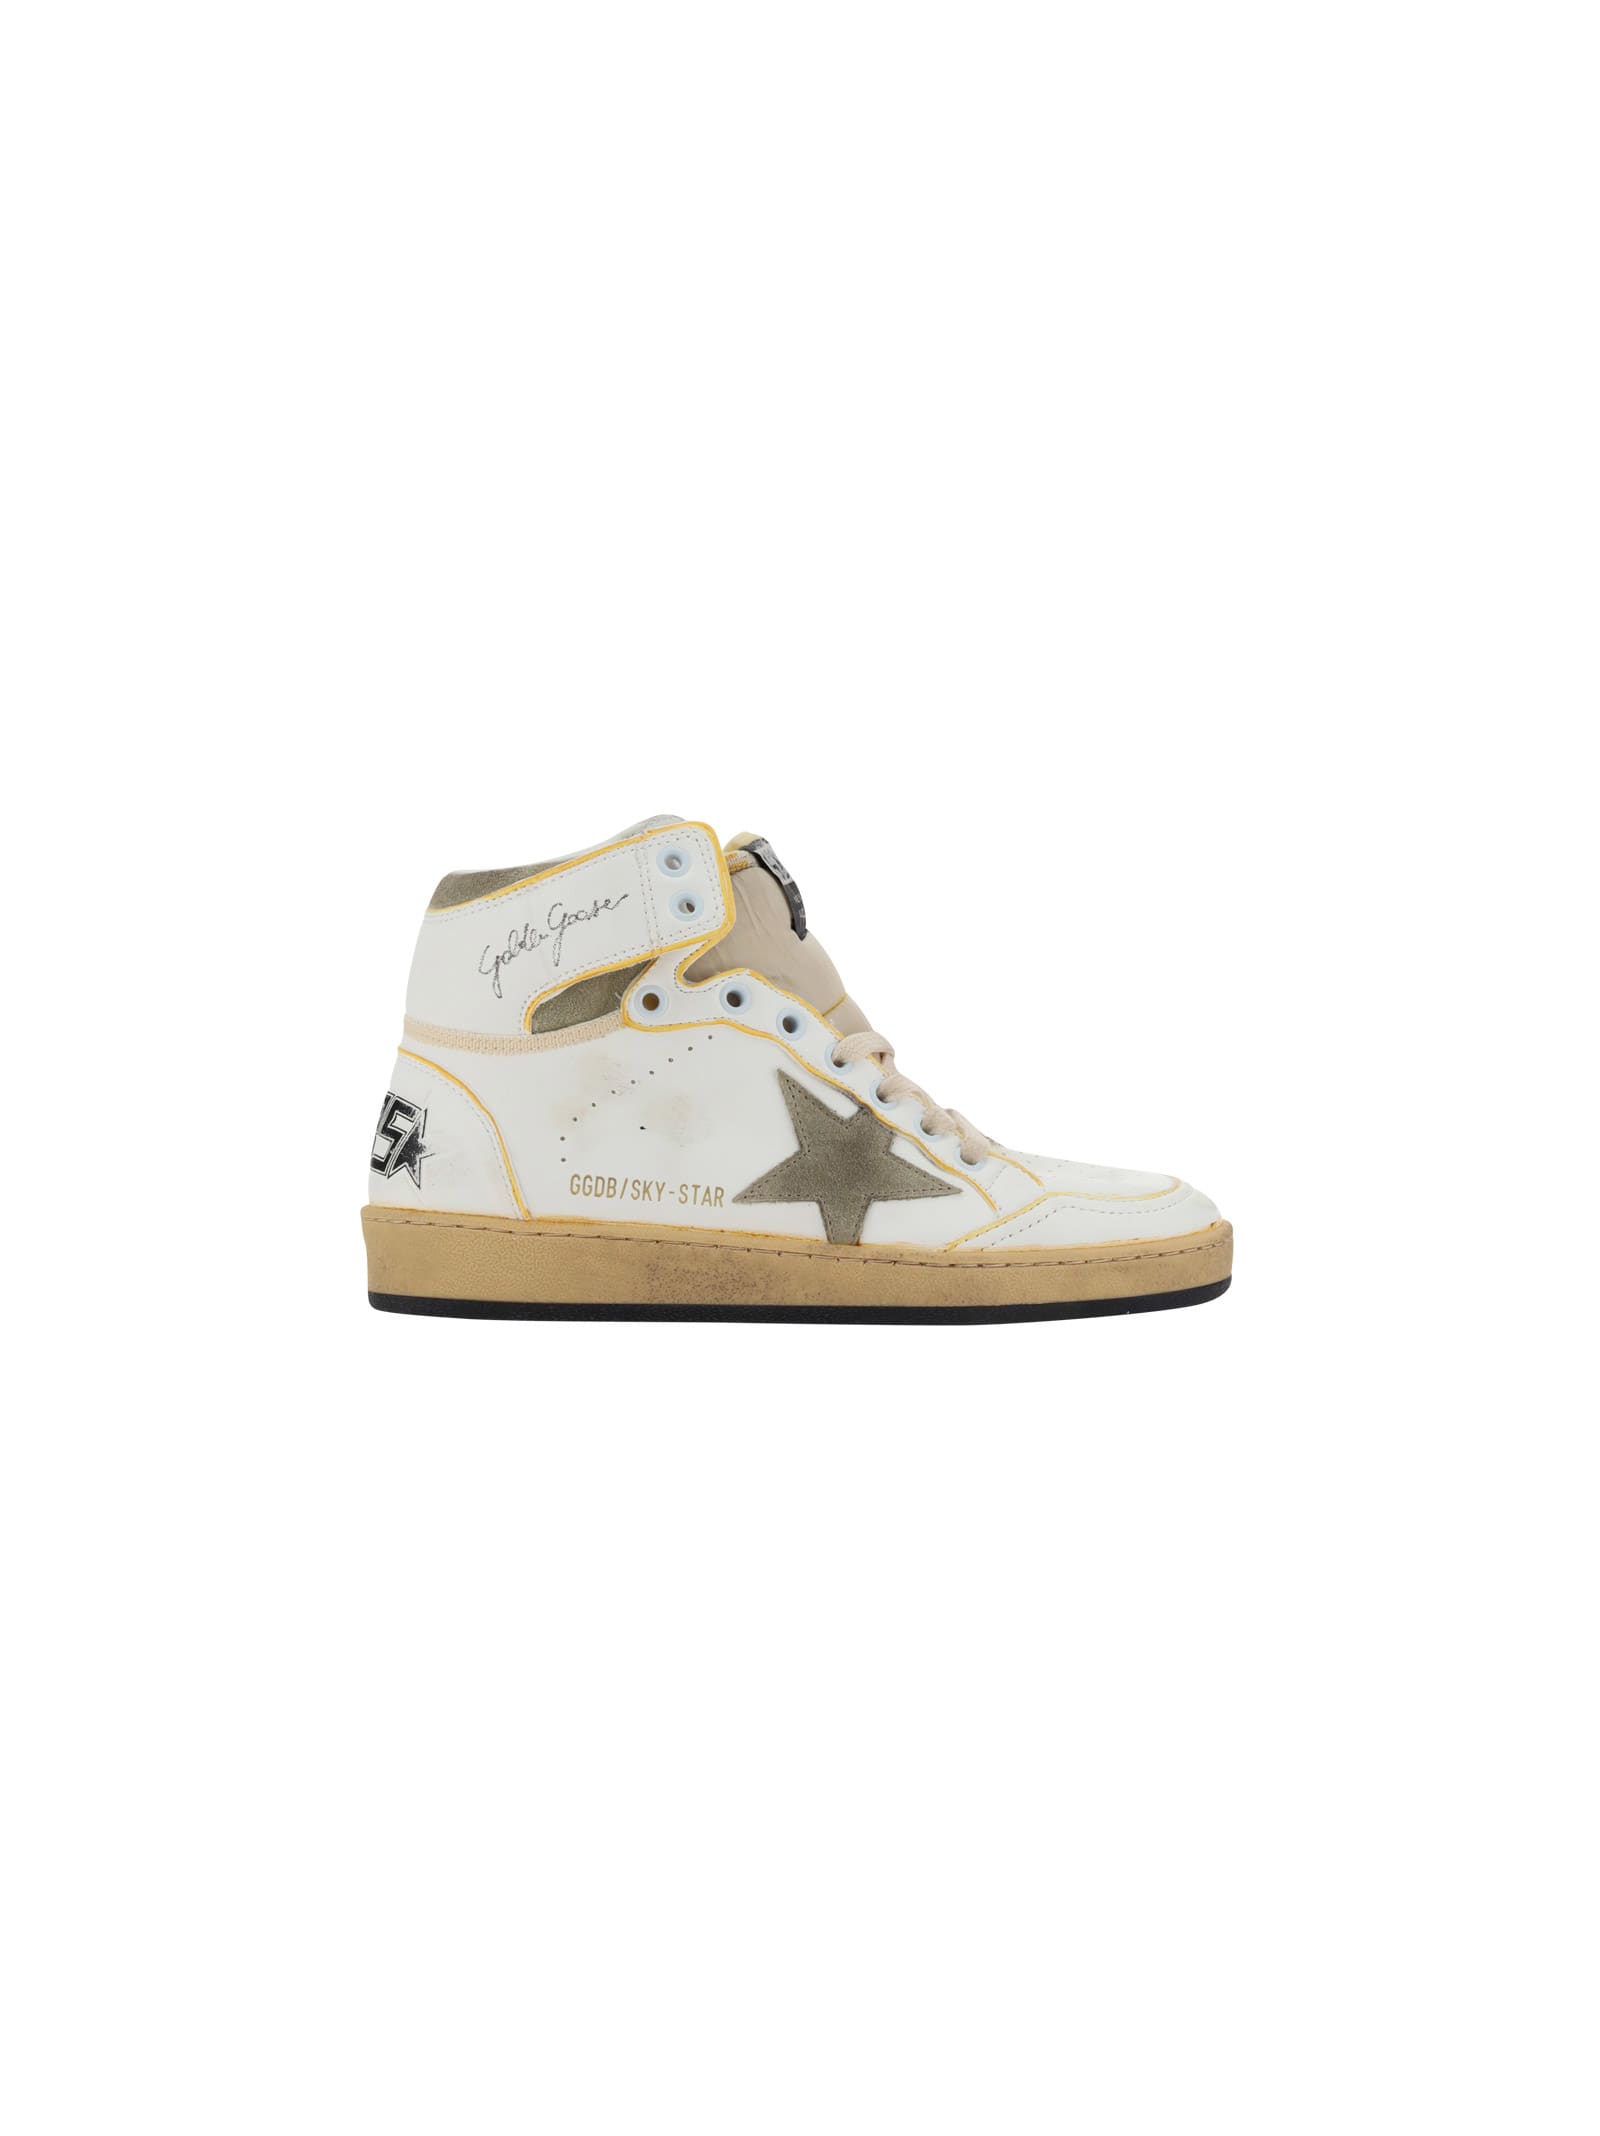 Shop Golden Goose Sky Star Sneakers In White/taupe